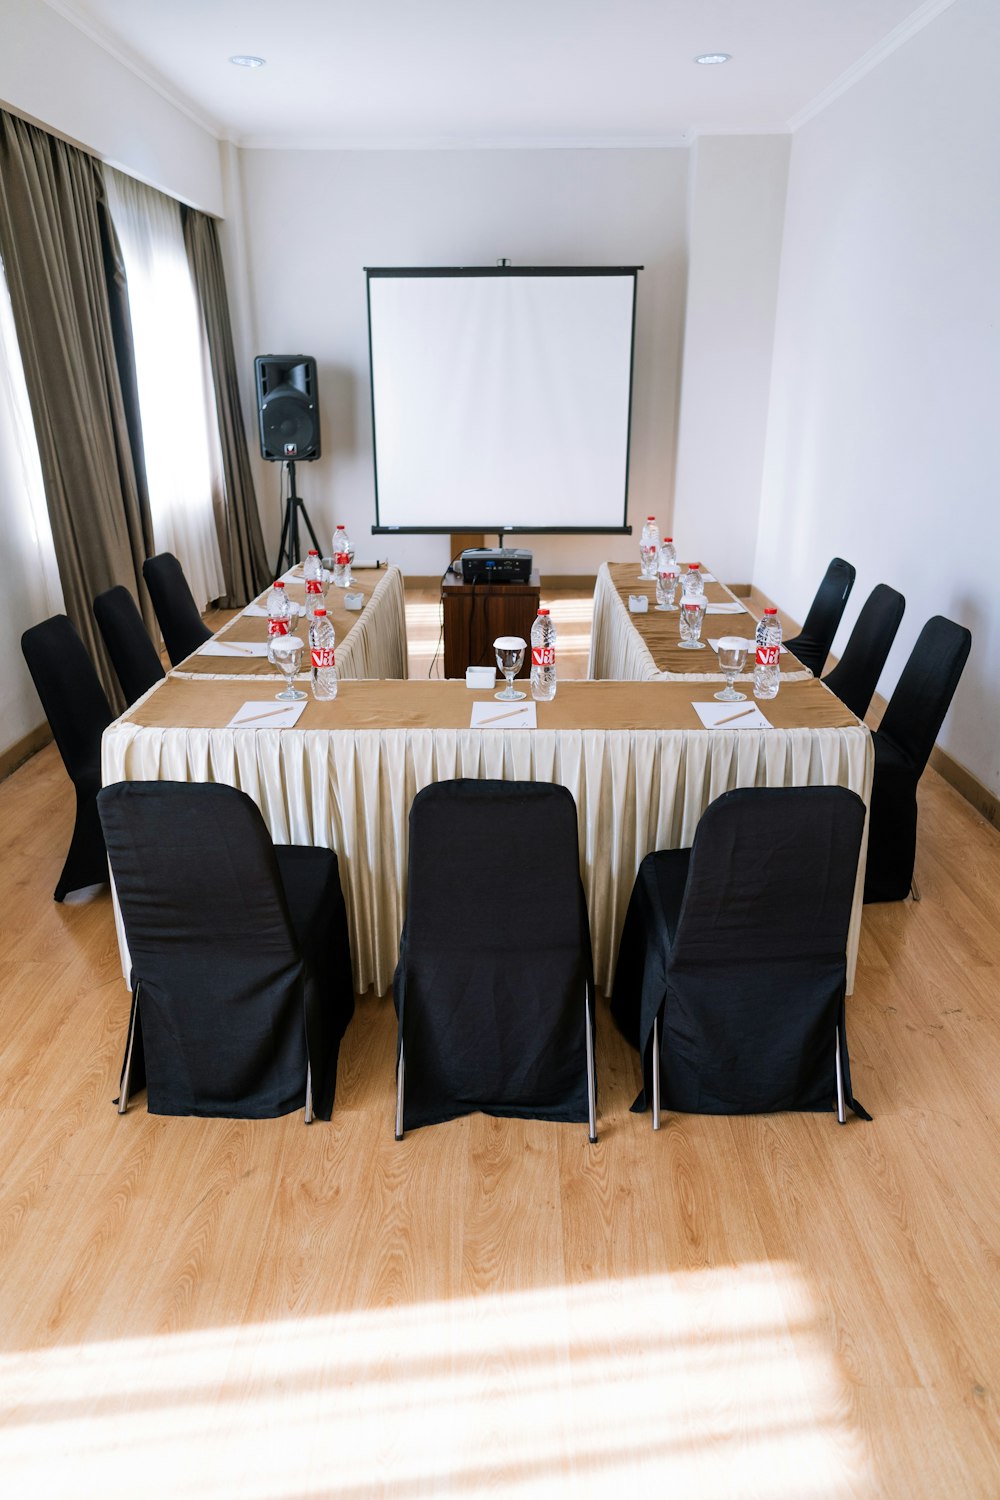 empty chairs inside room with projector canvas